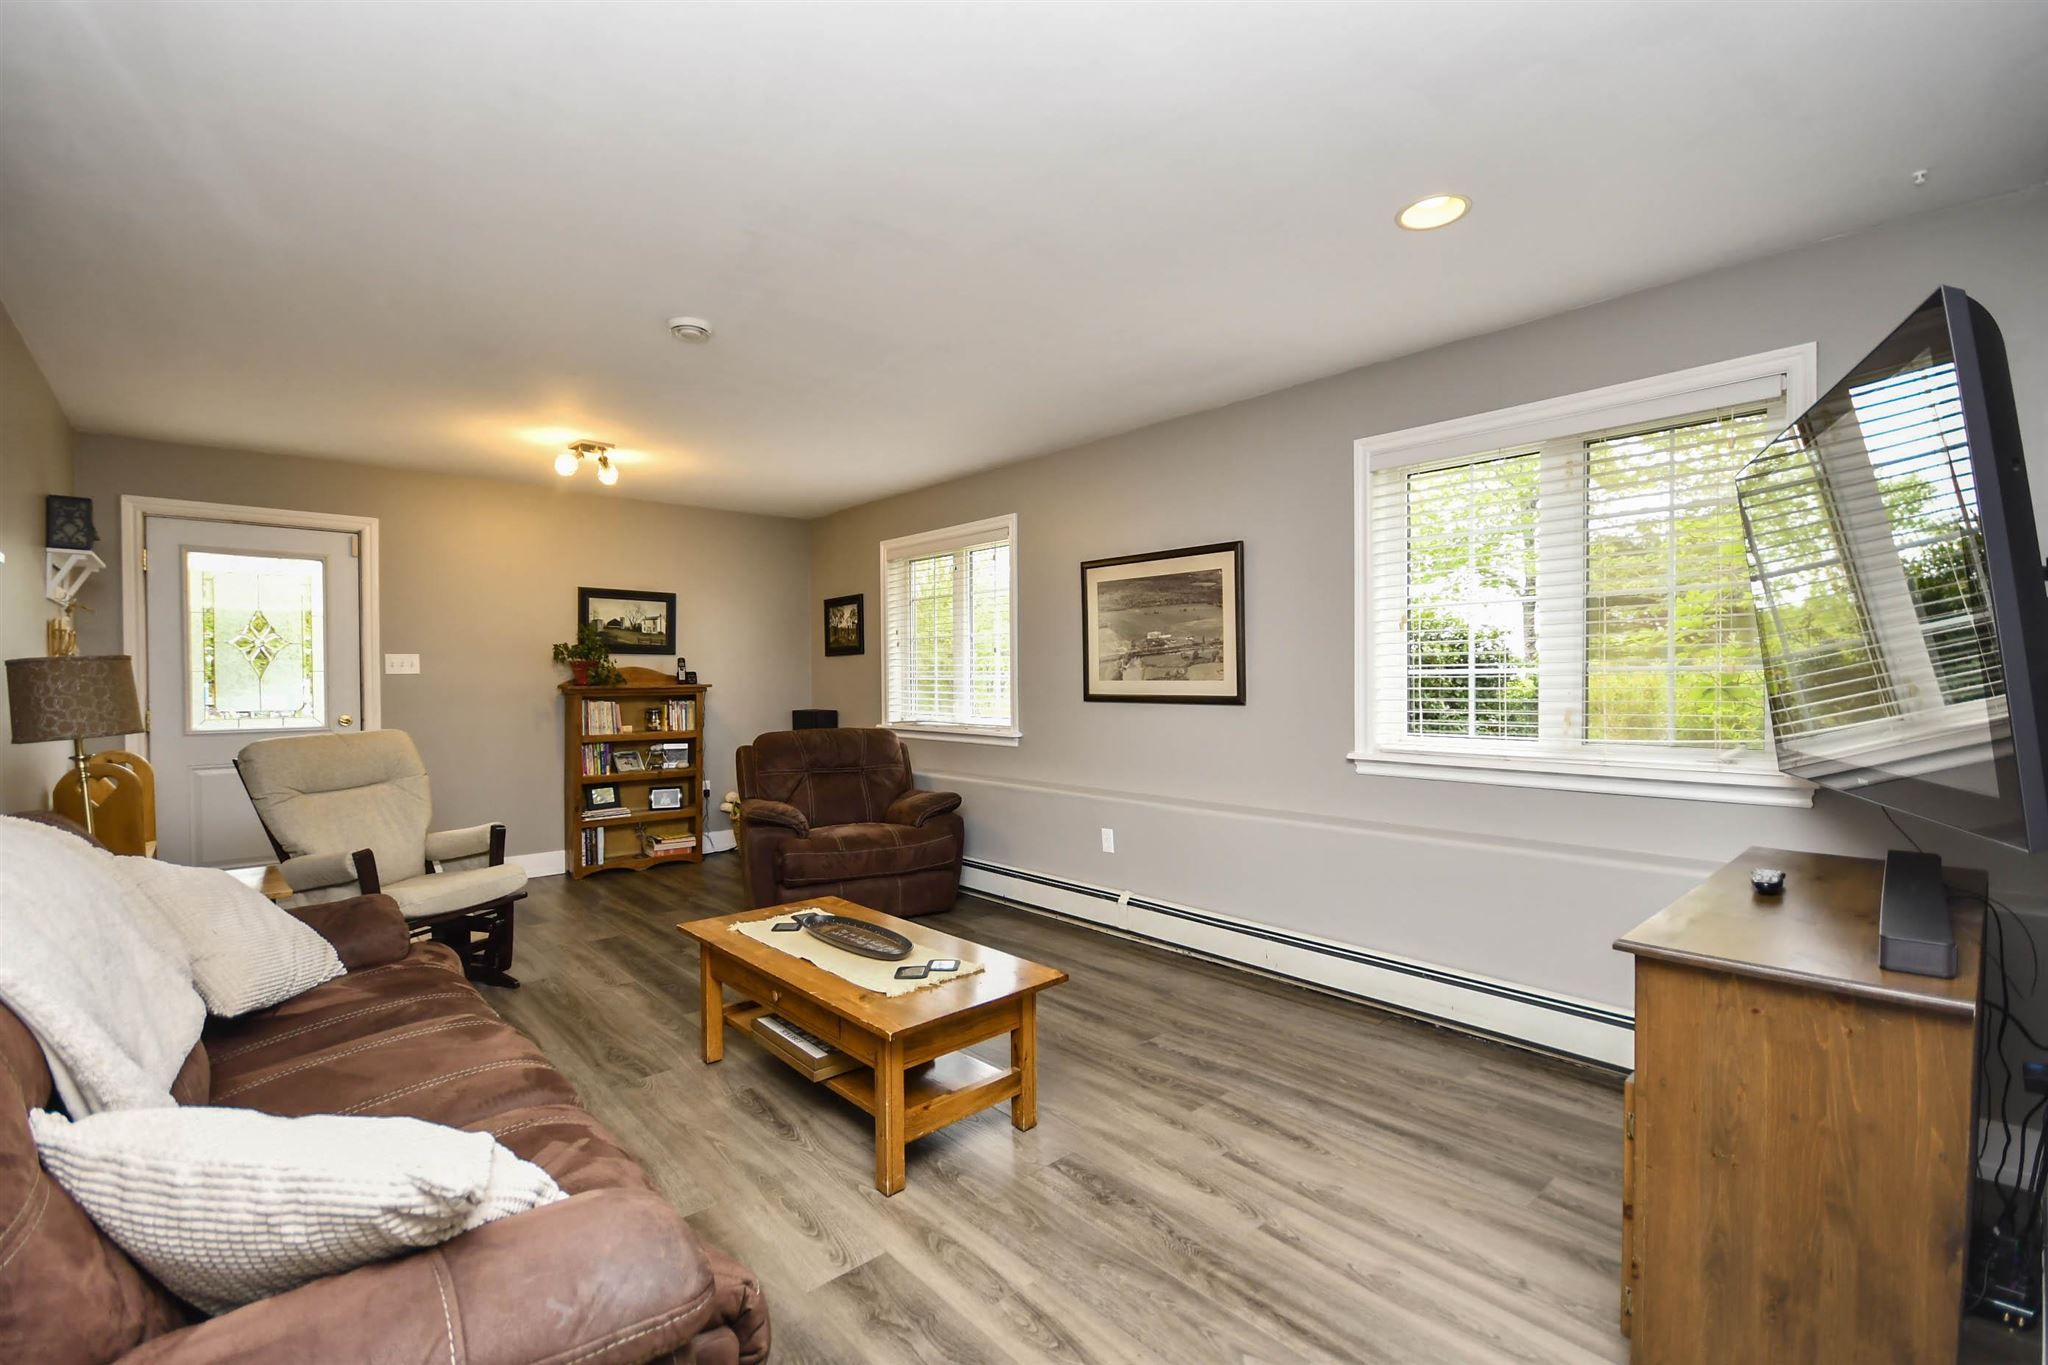 Photo 21: Photos: 290 St George Blvd in Kingswood: 21-Kingswood, Haliburton Hills, Hammonds Pl. Residential for sale (Halifax-Dartmouth)  : MLS®# 202113325